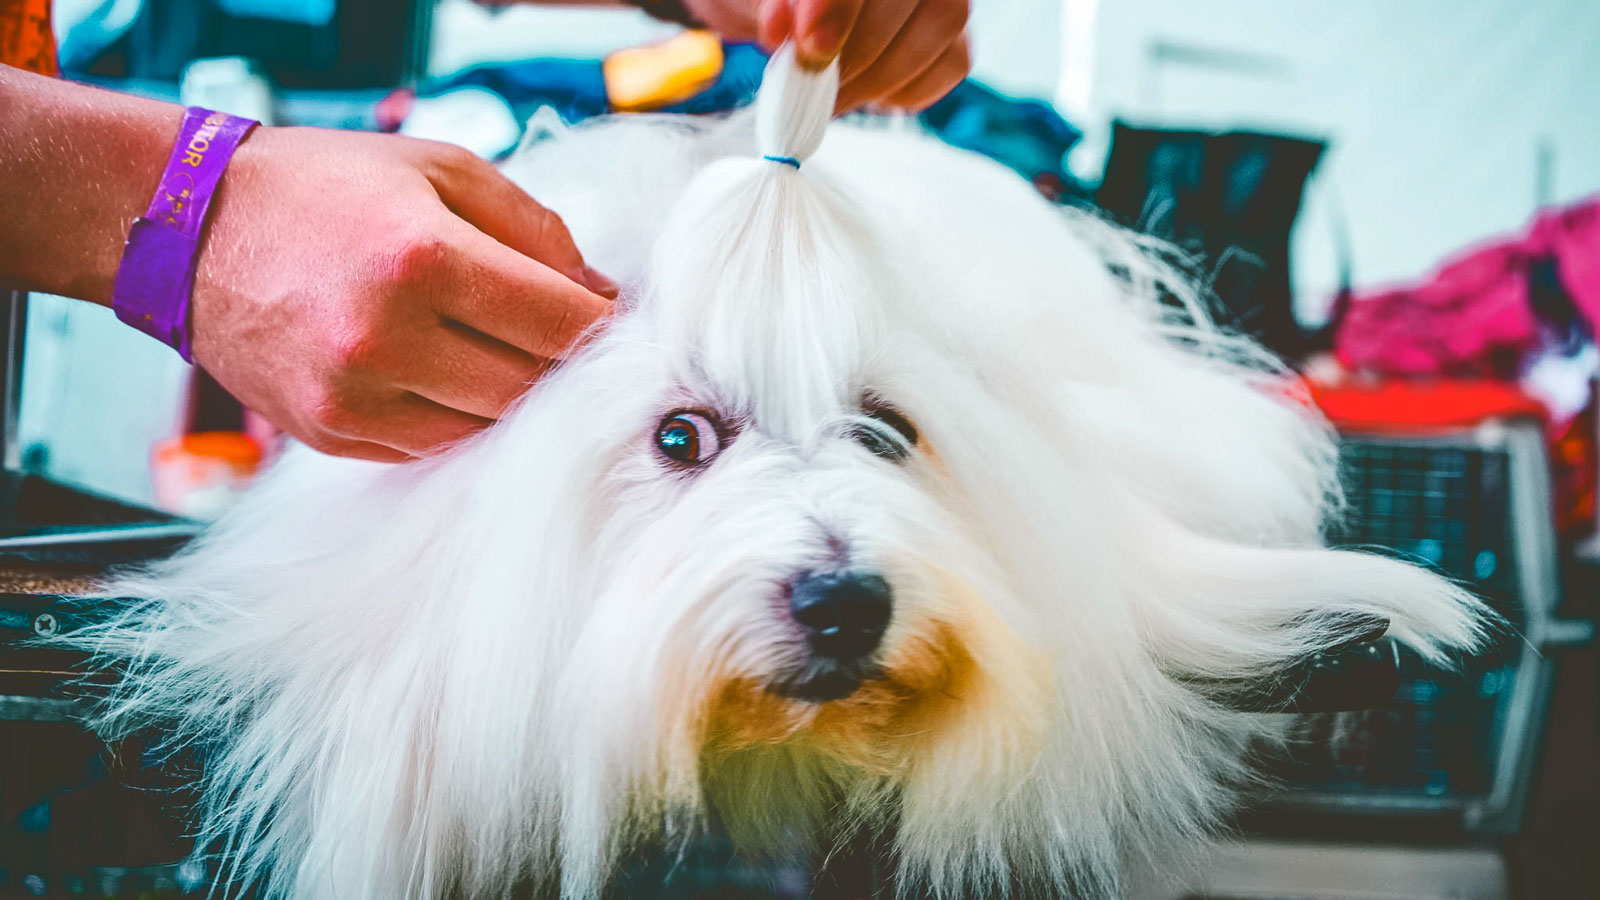 A dog with long white hair getting groomed